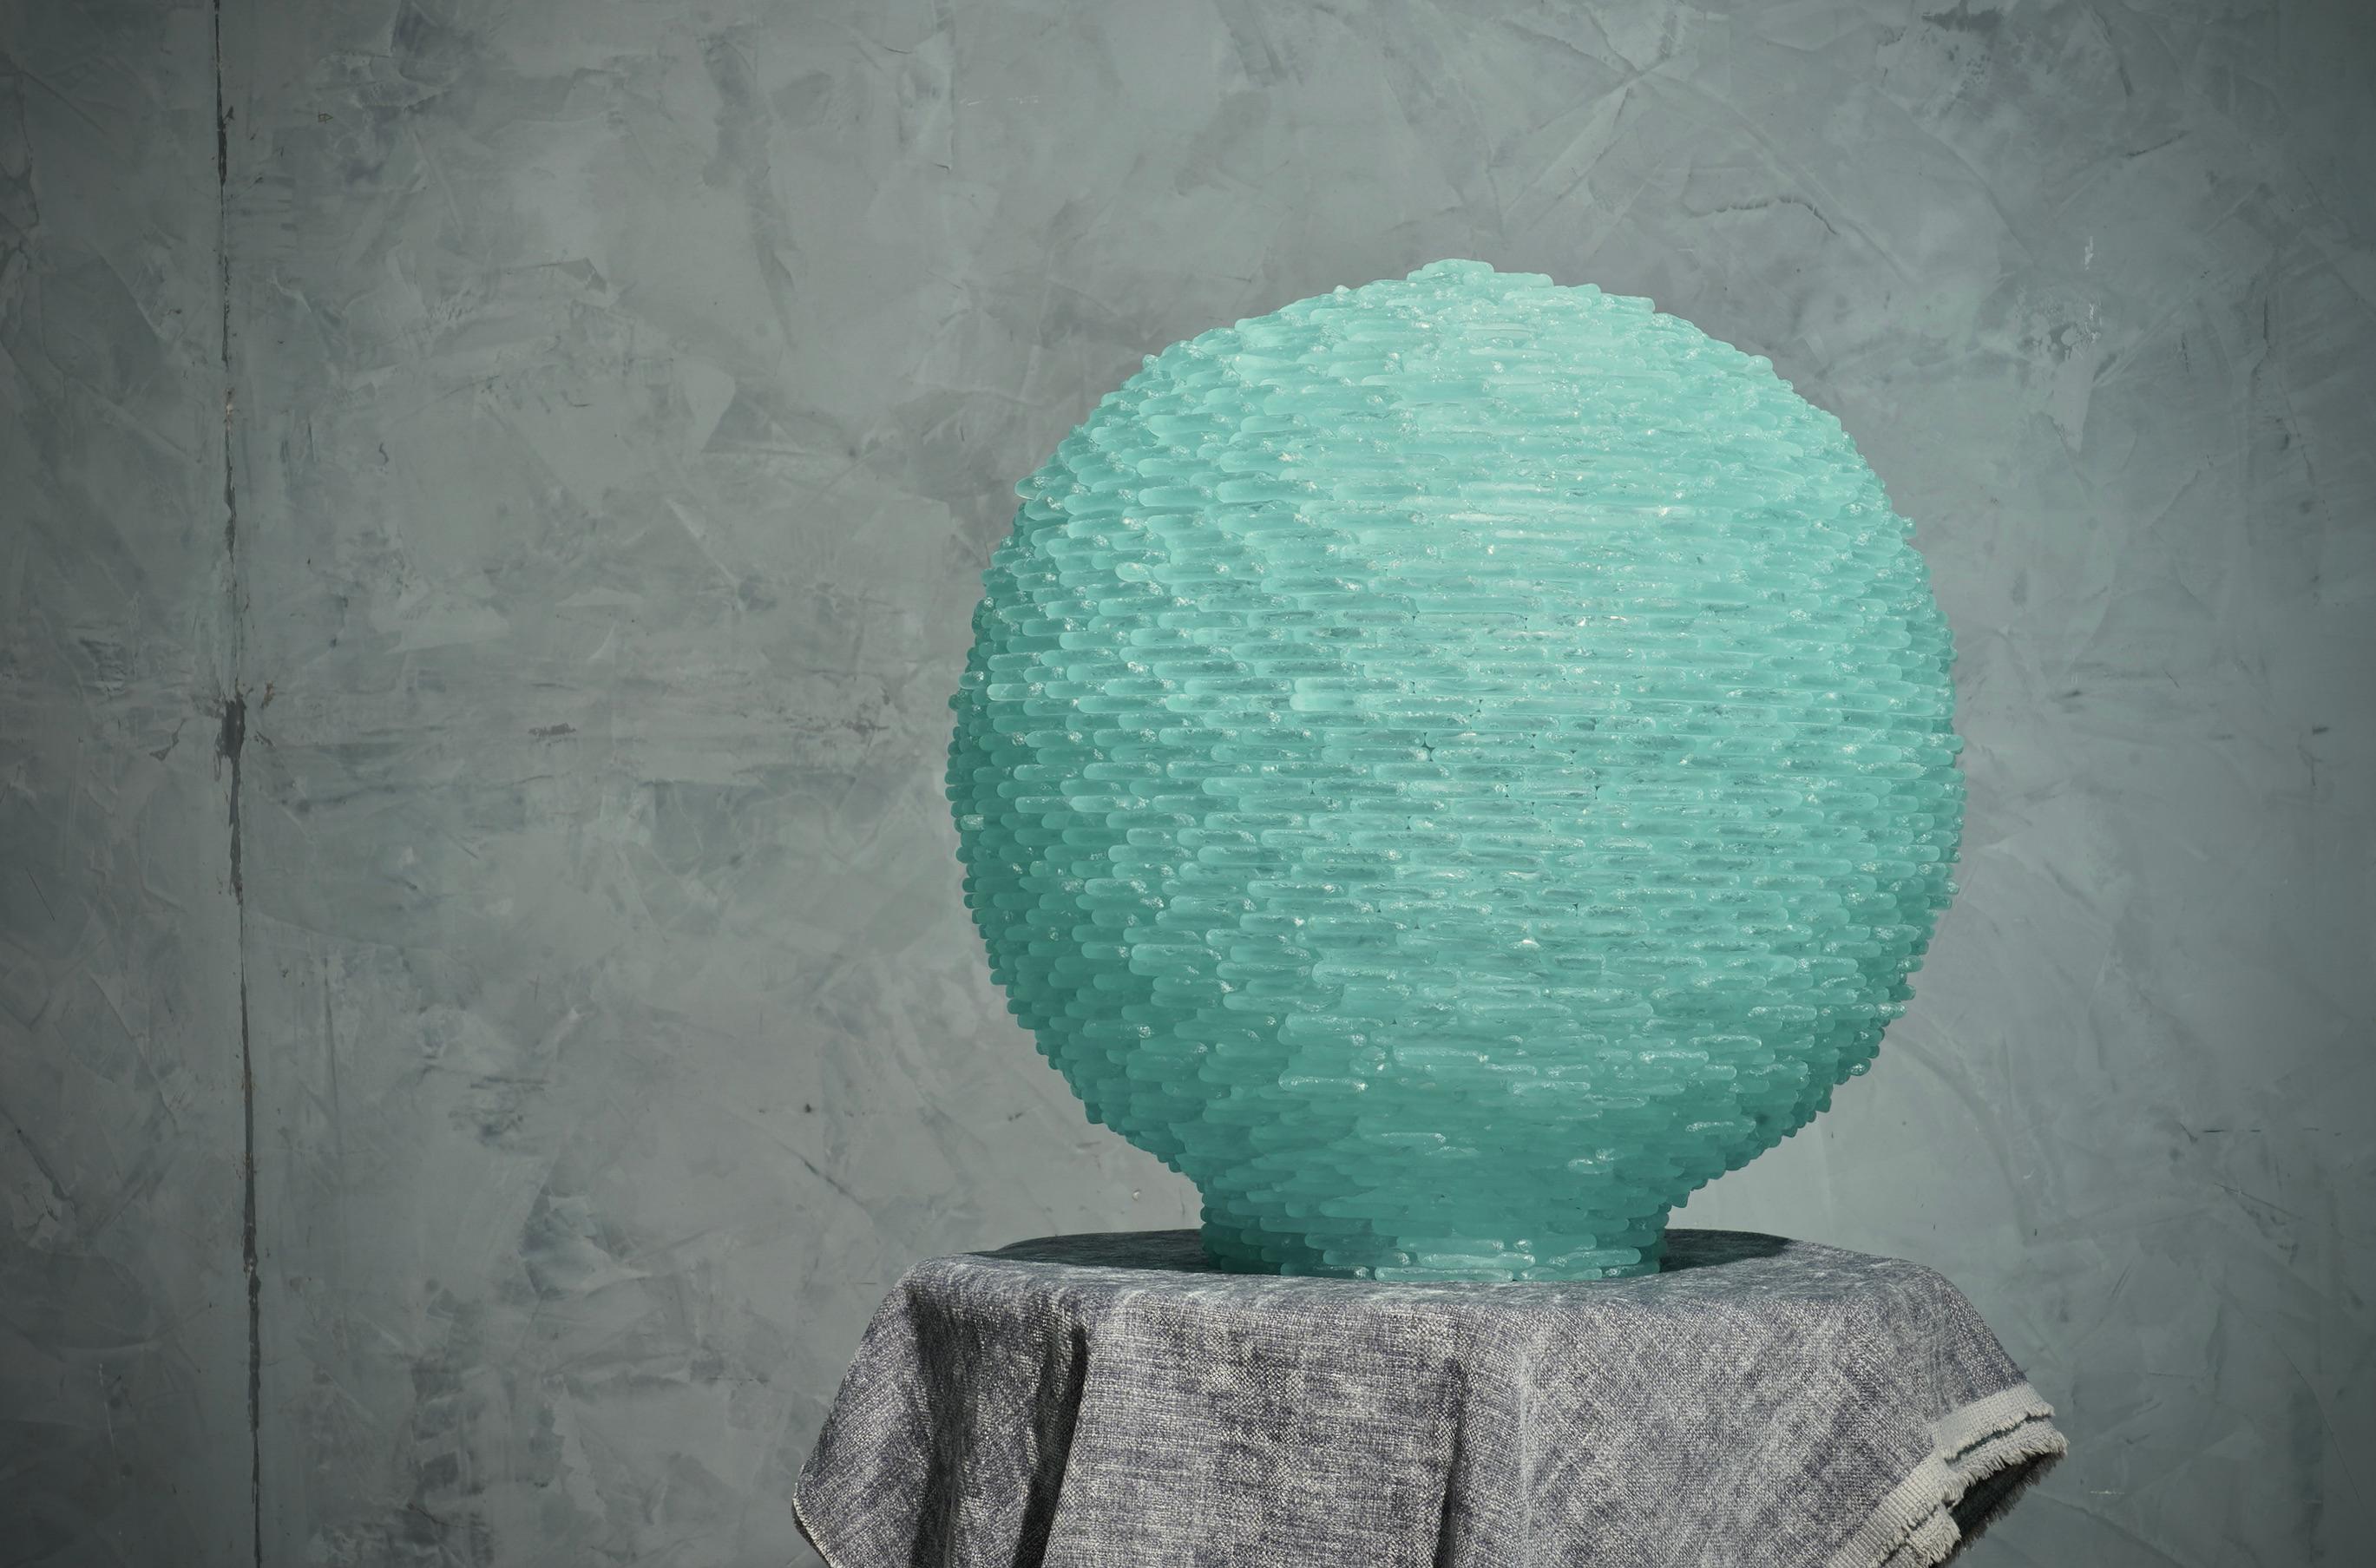 Splendid terrestrial globe all in satin-finished Murano glass stones, beautiful aqua green color.

The globe is composed of two superimposed semi-spheres, formed by an infinite series of small plates in Murano glass. Internally there are lights that